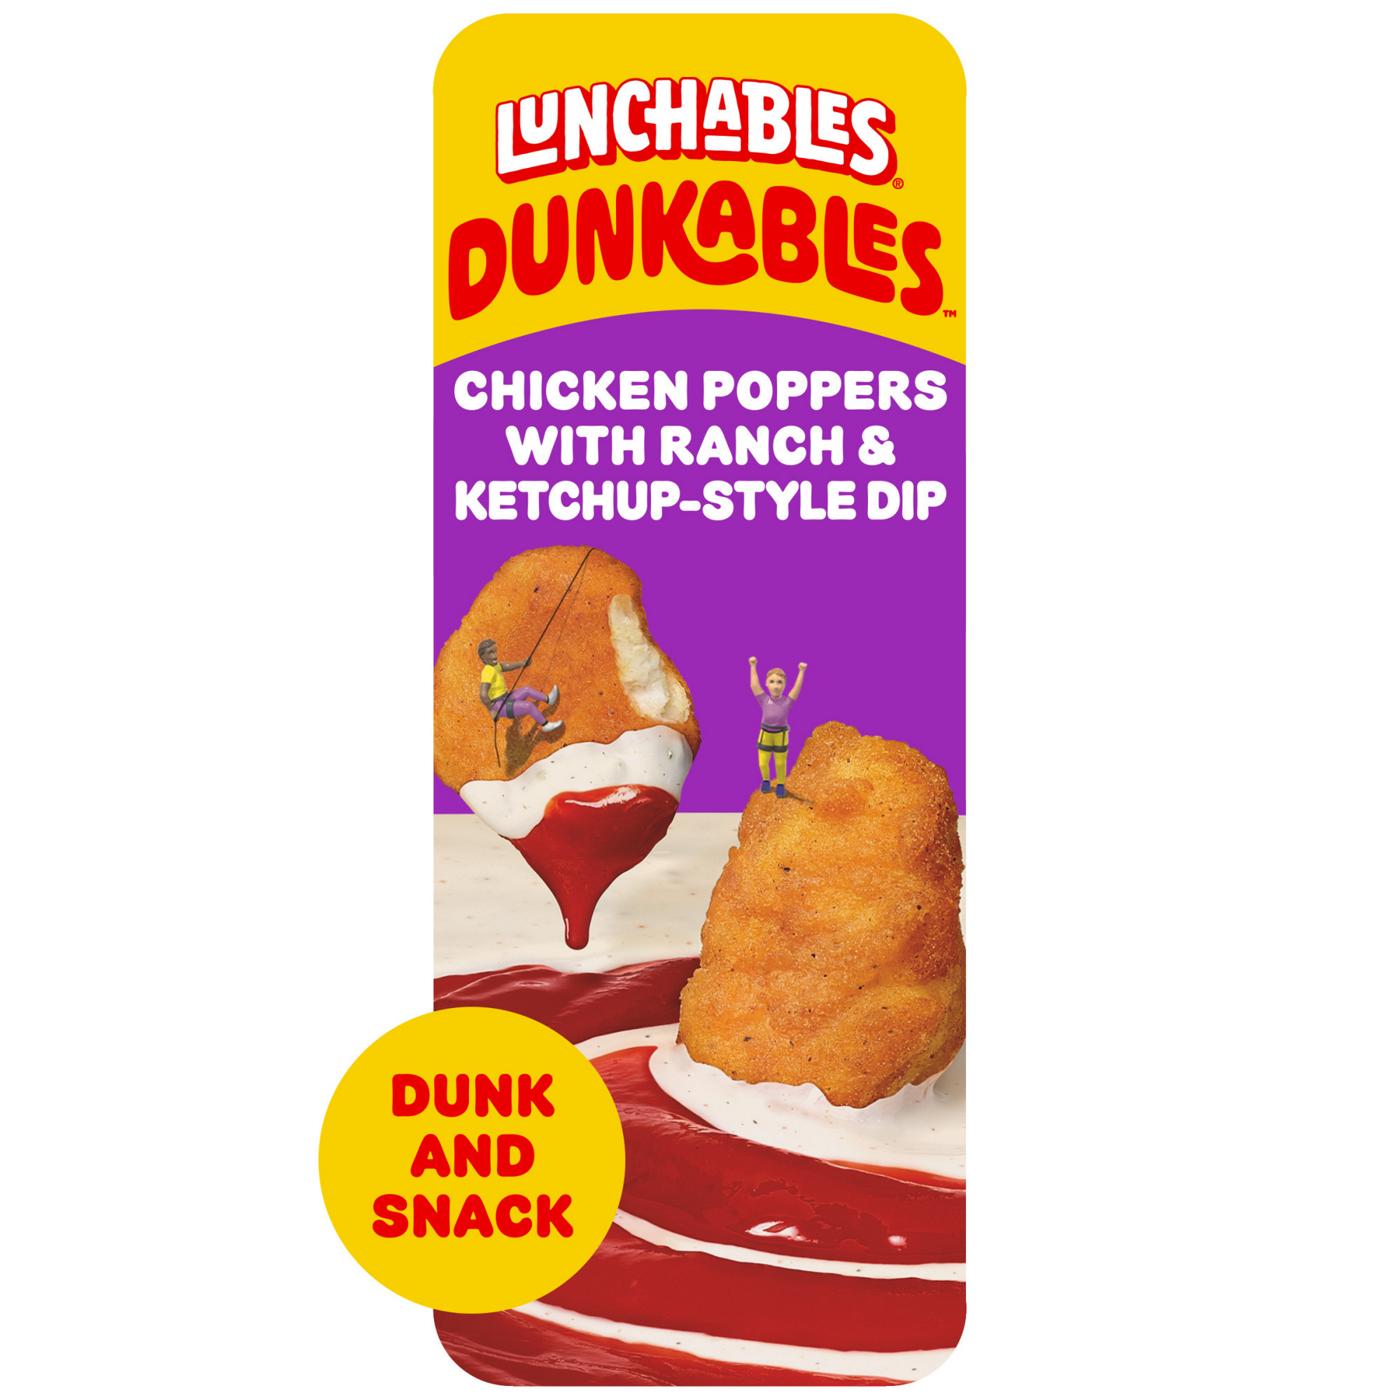 Lunchables Dunkables Snack Kit Tray - Chicken Poppers with Ranch & Ketchup; image 2 of 8